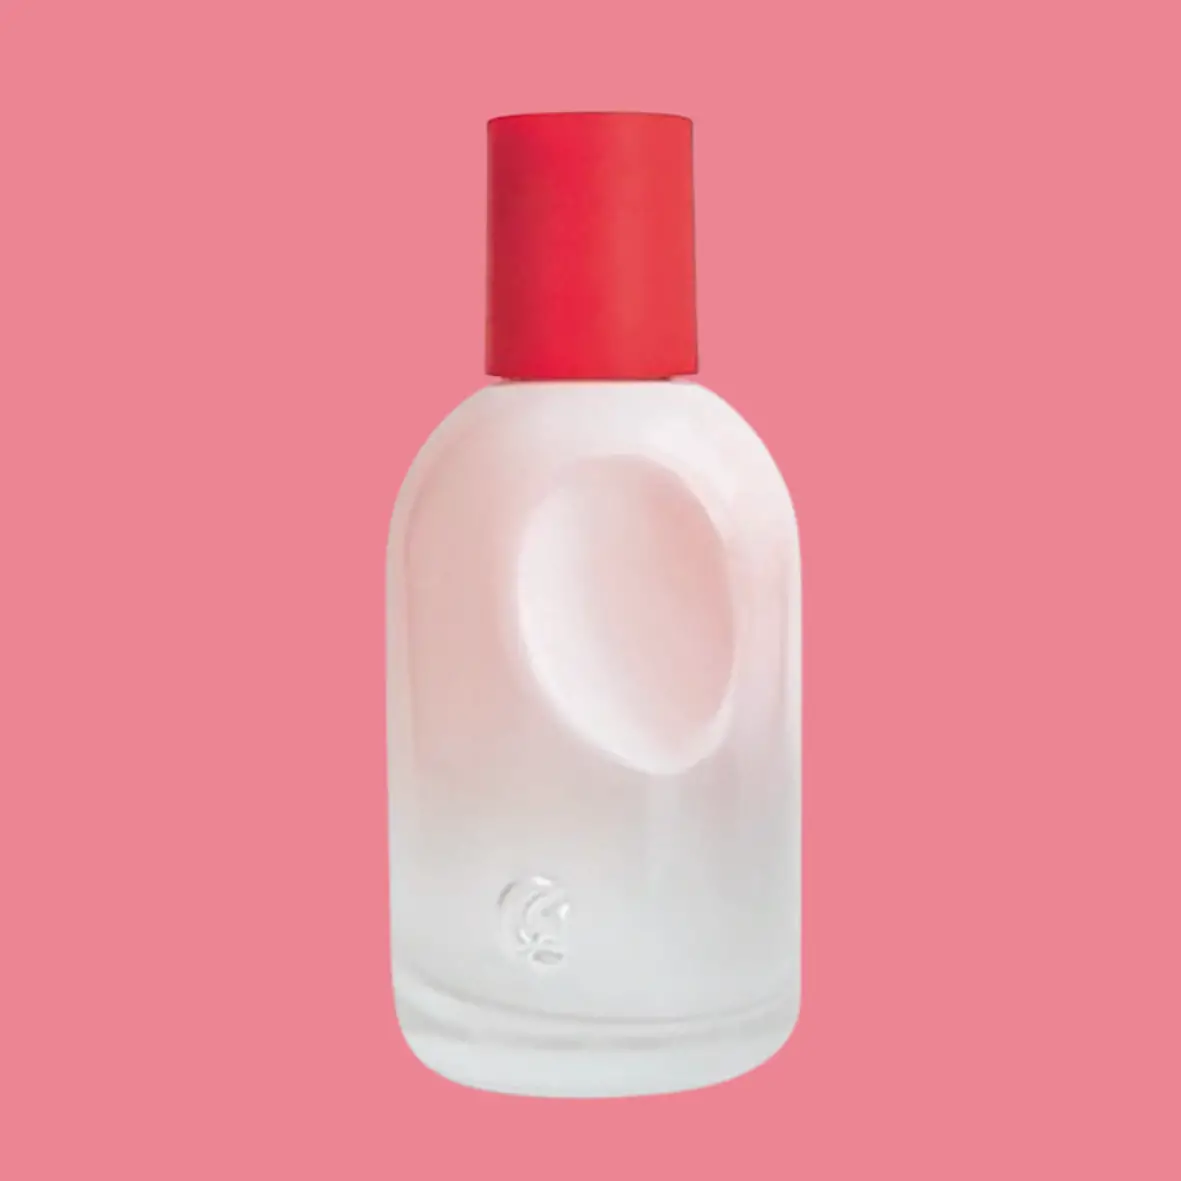 Glossier-You fragrance
The Best Vegan and Cruelty Free Perfumes